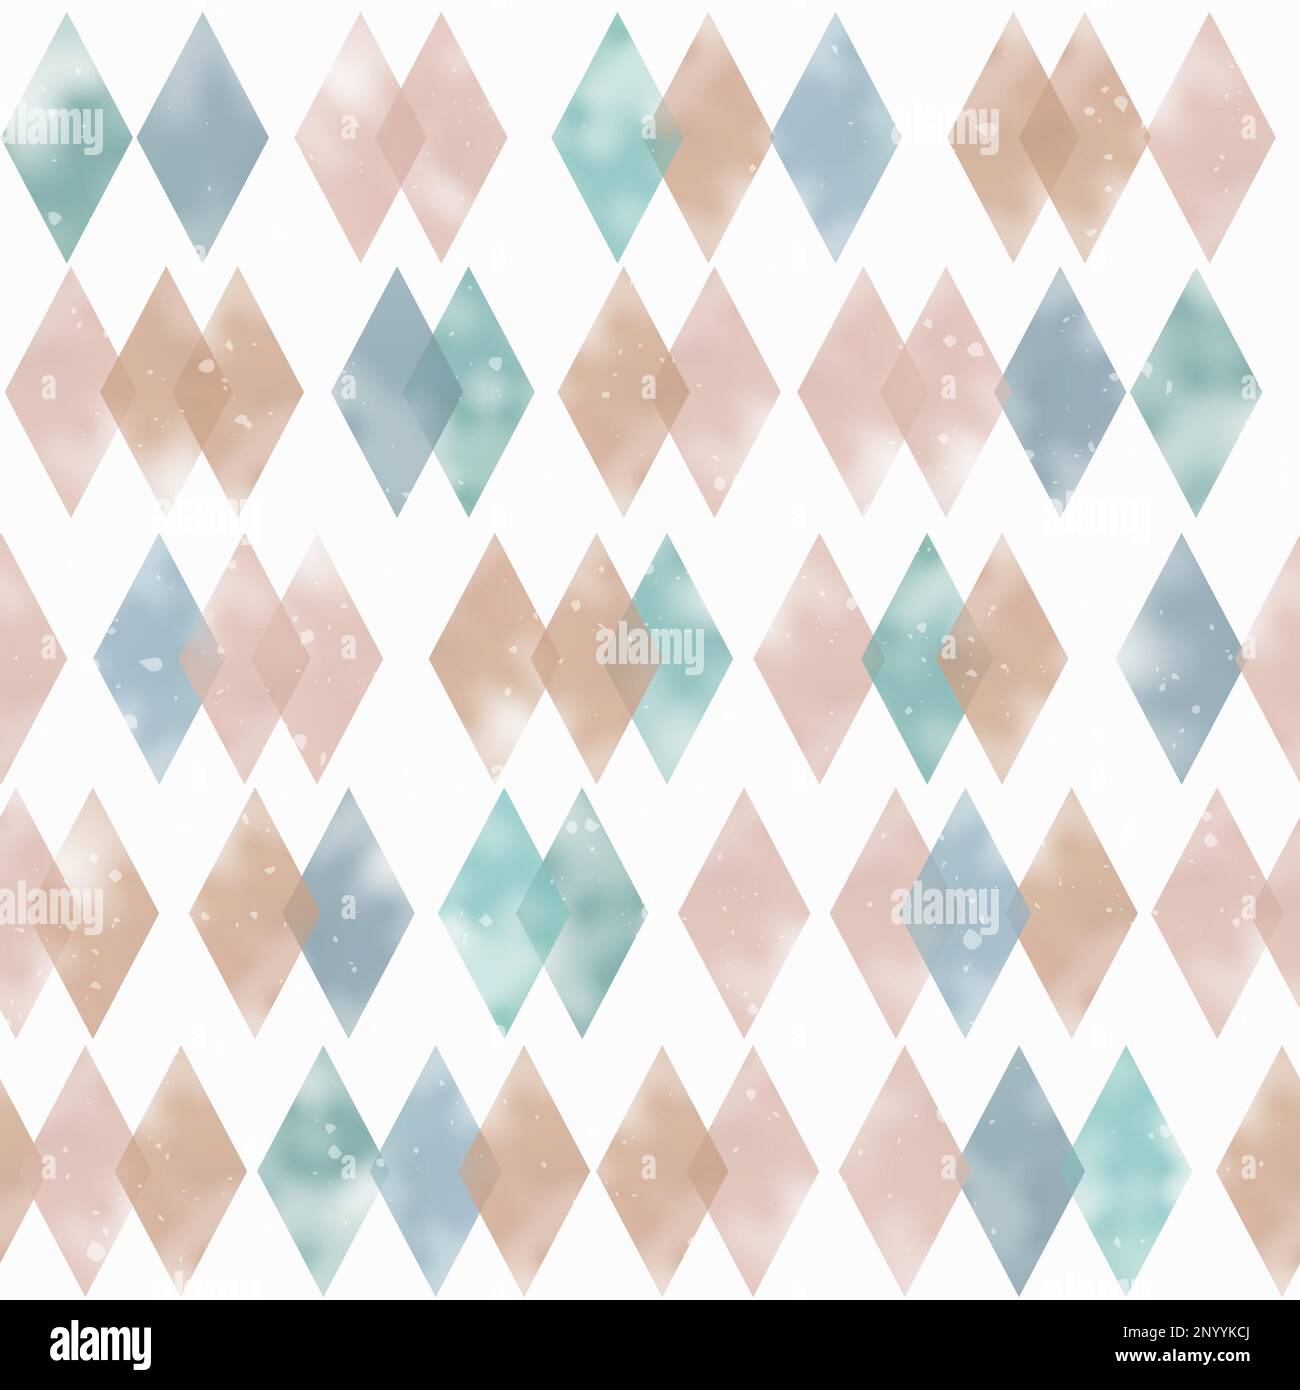 Vector Seamless Pastel Diamonds or Checkers Pattern, Retro and Watercolor Effect Stock Vector